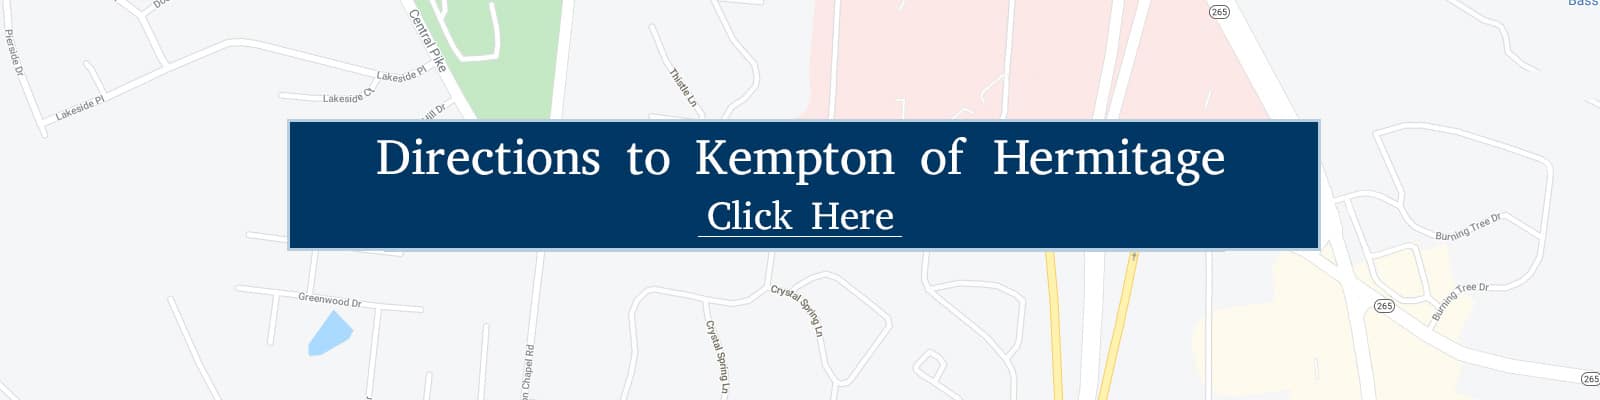 Directions and Map to Kempton of Hermitage in Metropolitan Nashville